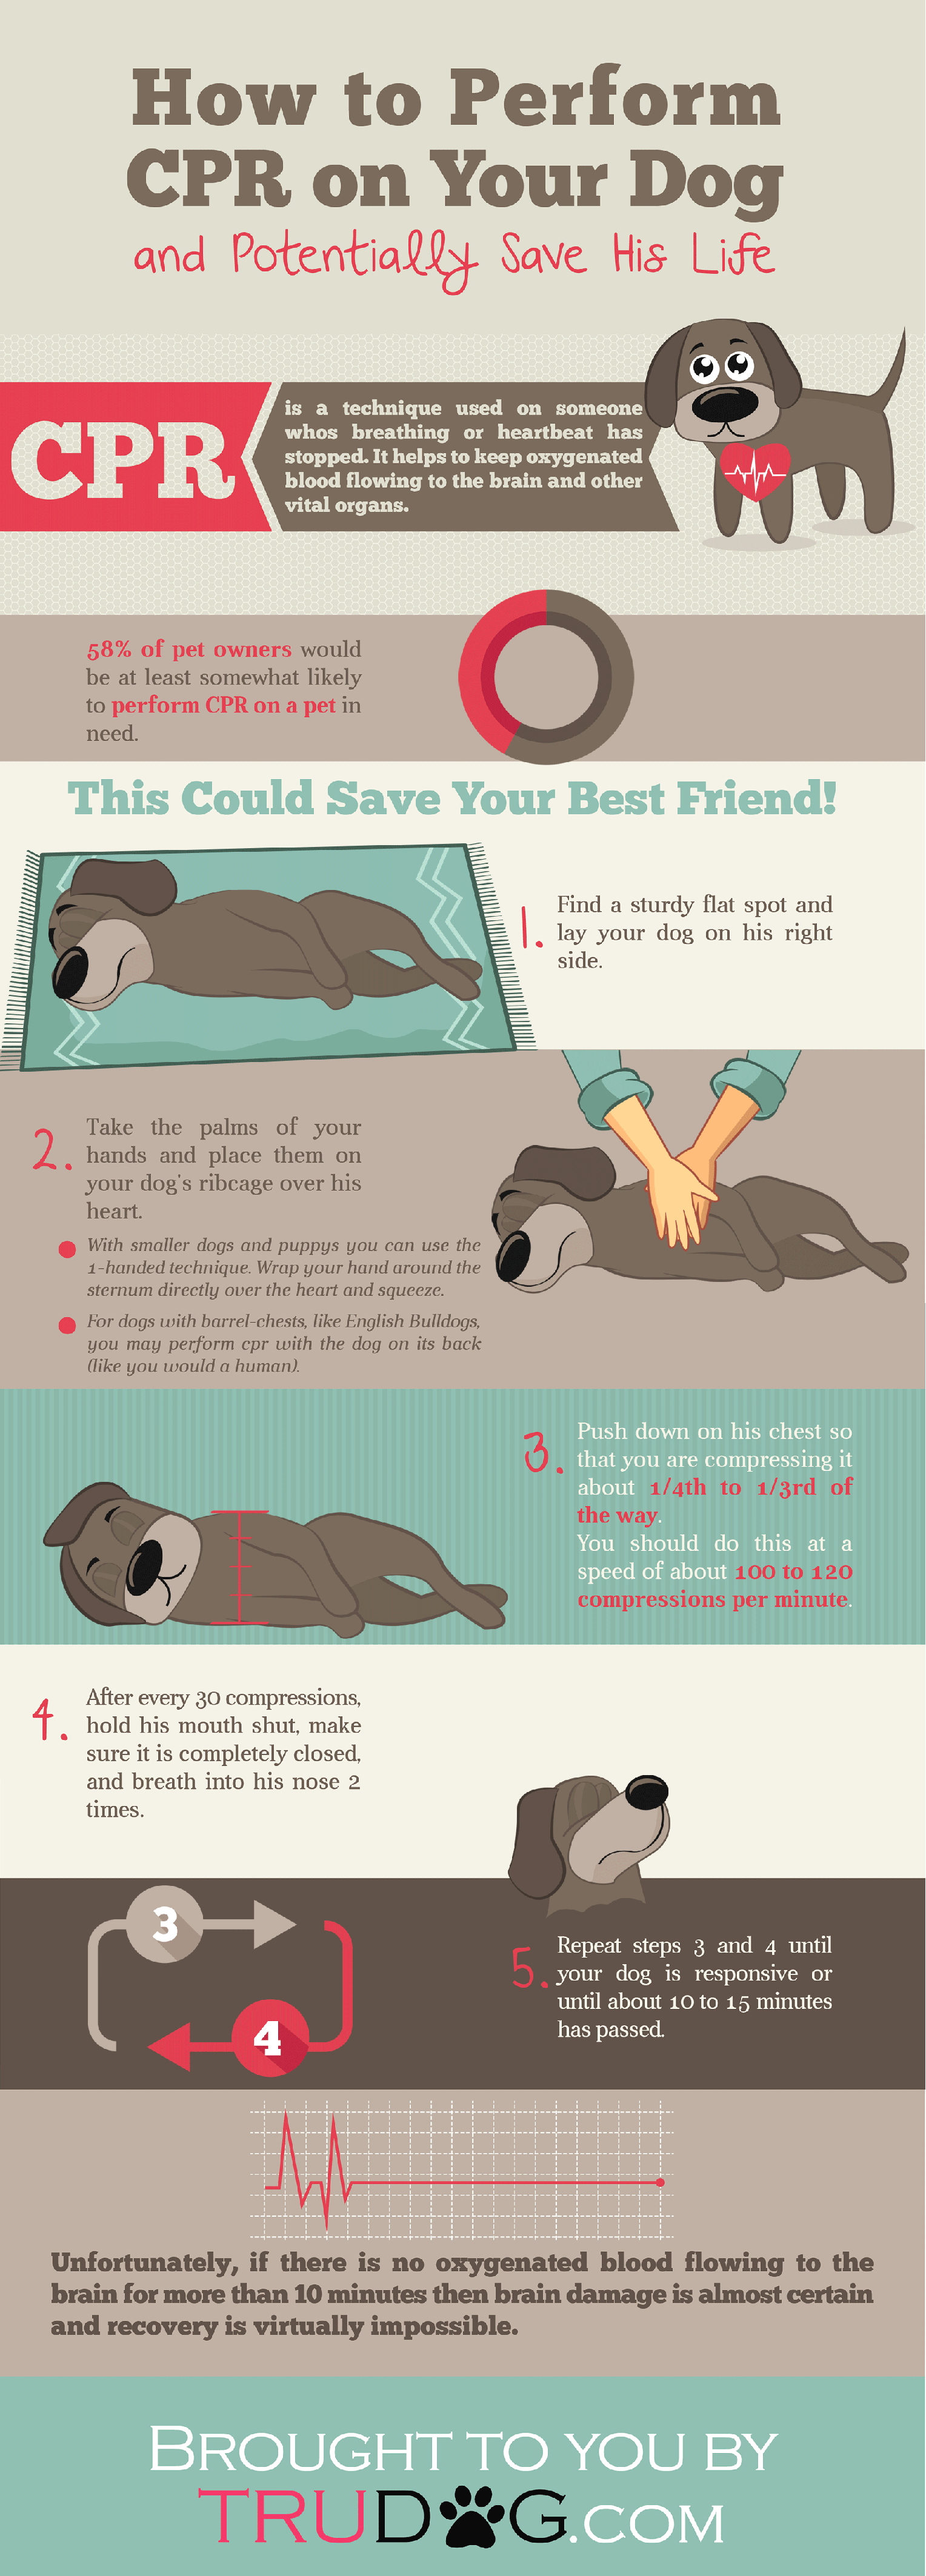 [Infographic] How to Perform CPR on Your Dog